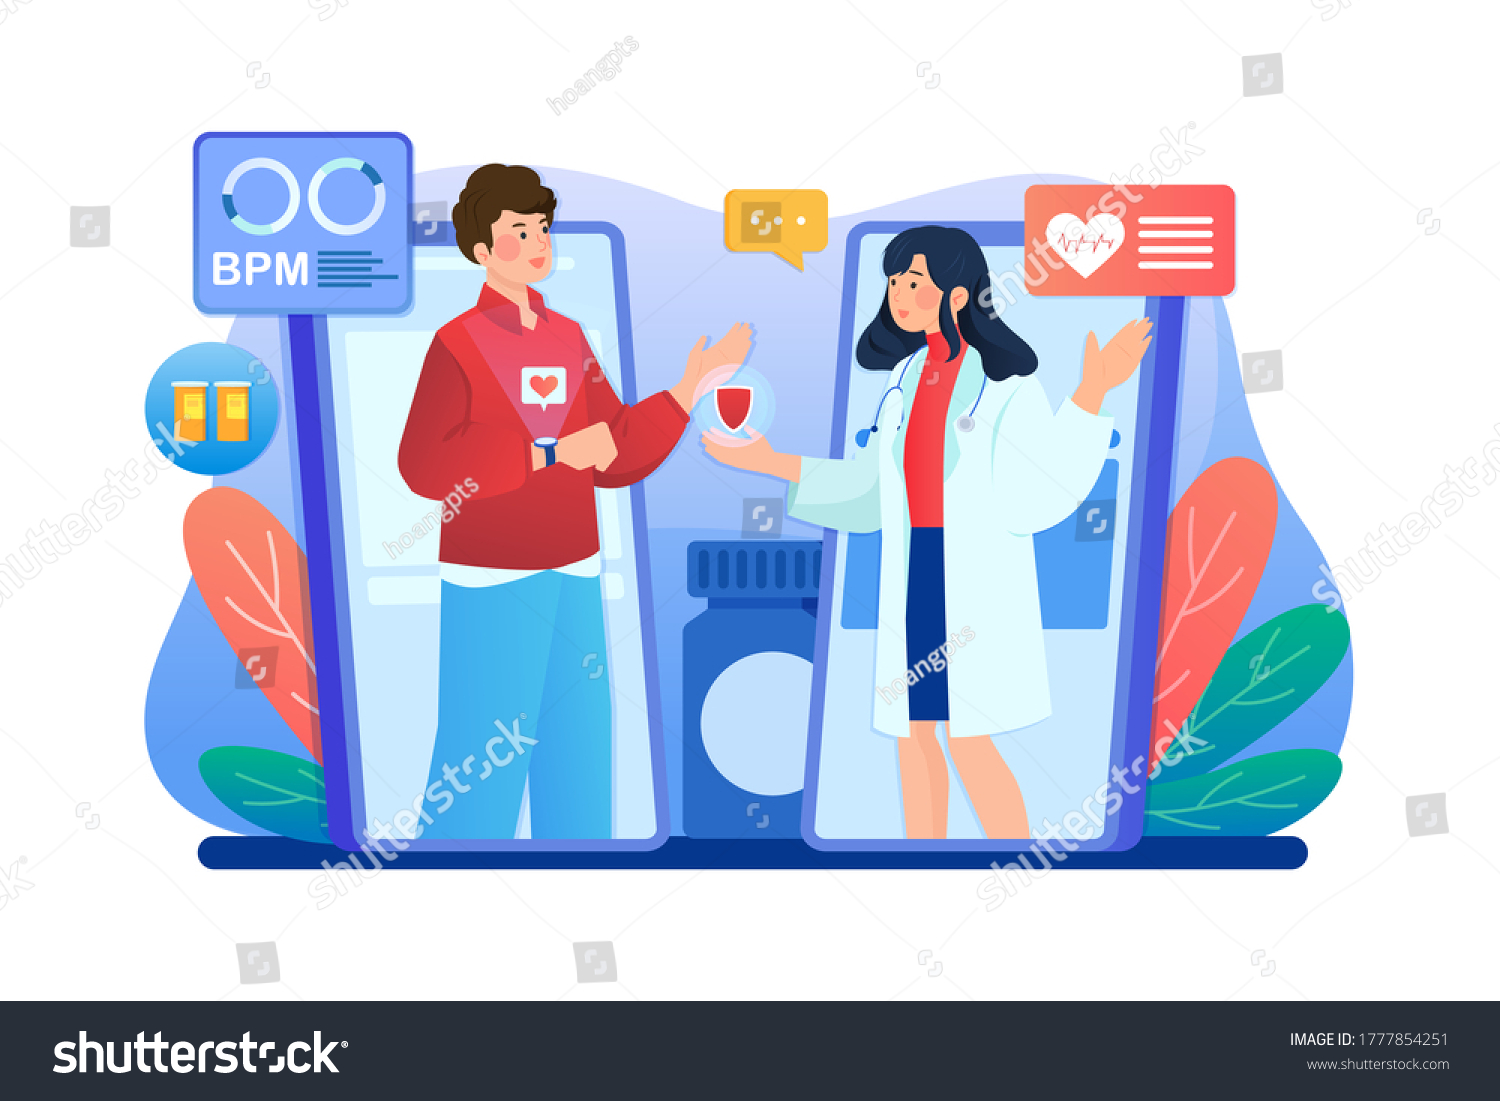 SVG of Patient talking to doctor using cell phone video call over his heartbeat rate data collected via smart watch app technology. svg